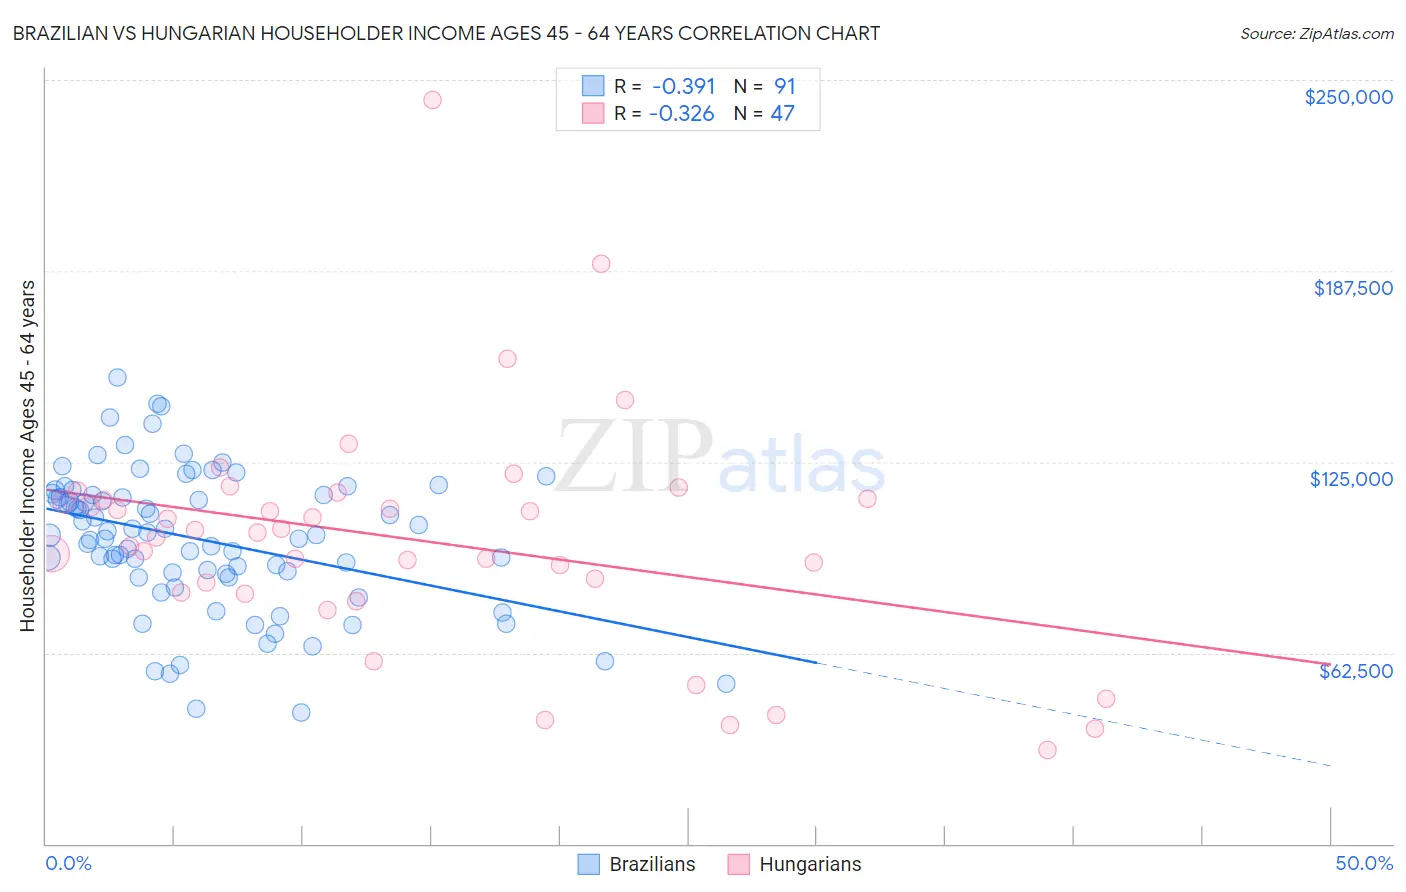 Brazilian vs Hungarian Householder Income Ages 45 - 64 years